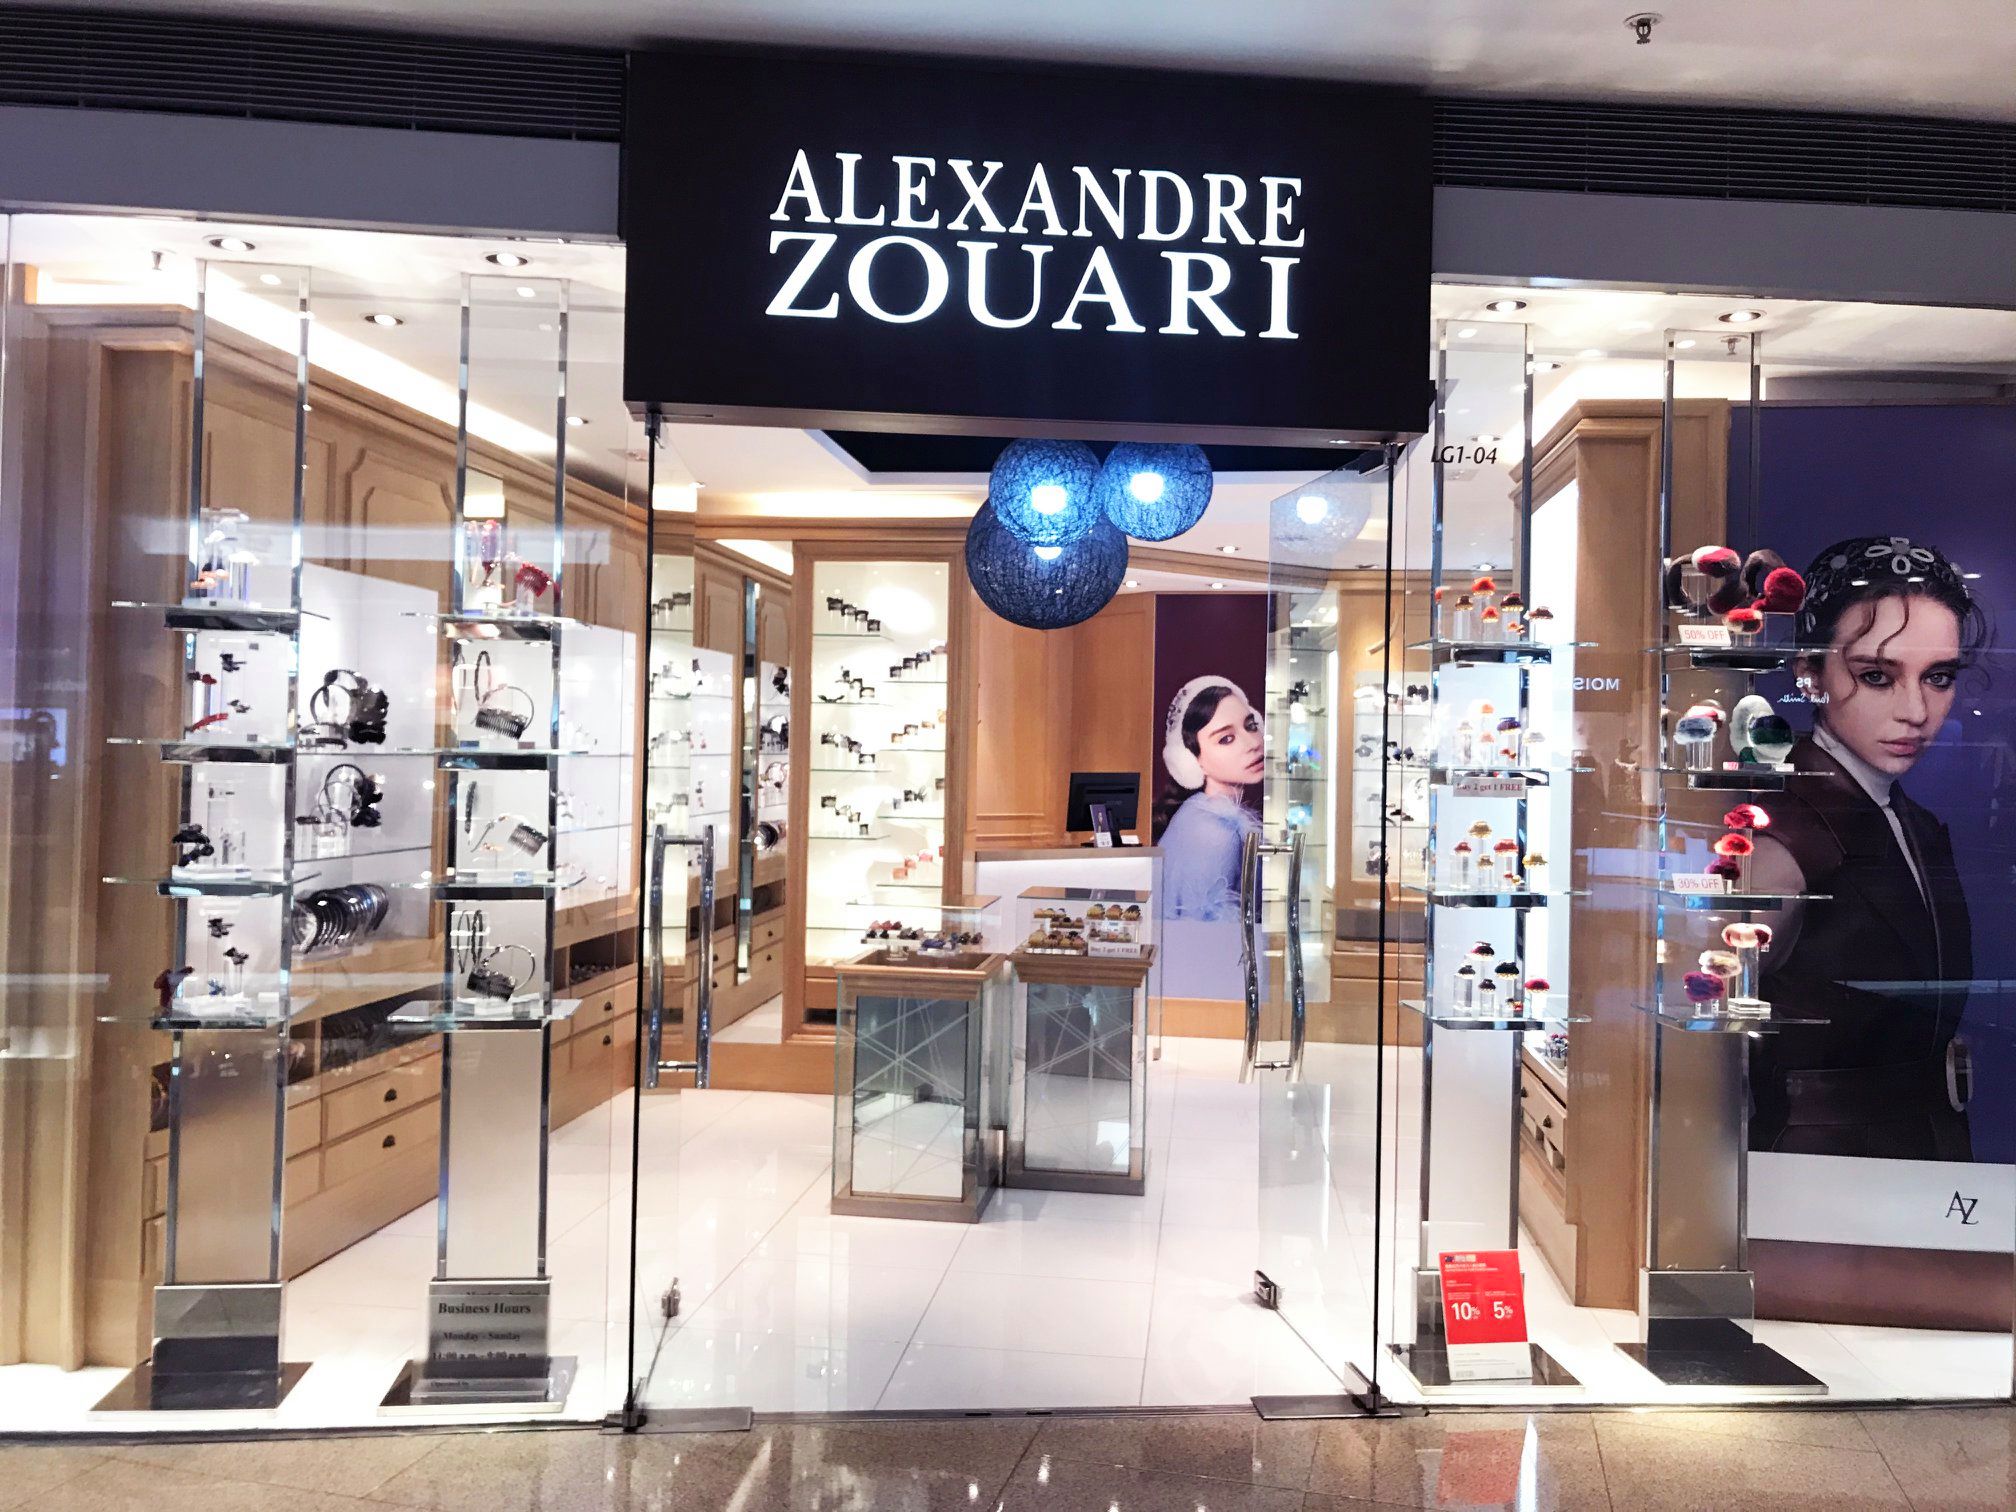 Alexandre Zouari Festival Walk boutique re-open today! To express our heartfelt appreciation to your support, an EXCLUSIVE gift will be rewarded upon spending at HK$1,800*. Please be invited to enjoy the privilege. *Excluding discount items. 又一城Alexandre Zouari專門店於今天重新開幕，為感謝大家支持，現推出獨家優惠。凡購買正價貨品滿港幣$1,800，即可獲贈精美髮飾一件，送完即止。歡迎大家到店選購！ Address: Shop LG1-04, Festival Walk, Kowloon Tong, Hong Kong...